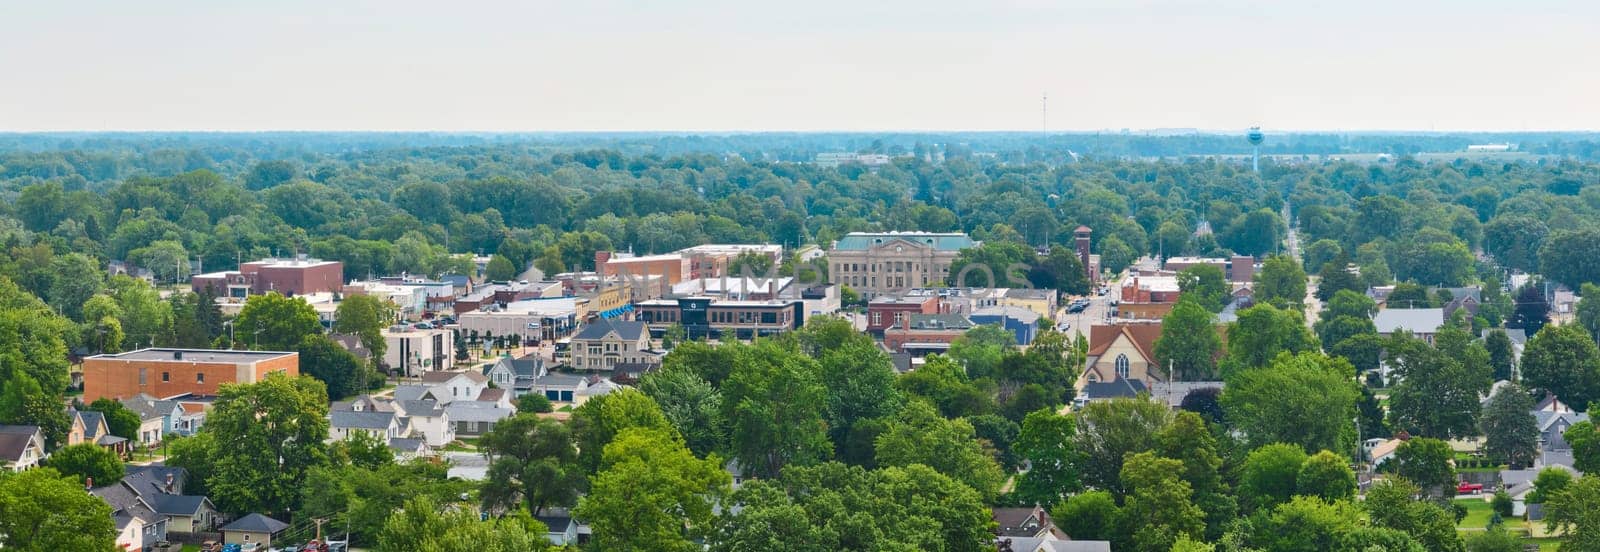 Wide panoramic view of downtown Auburn with Dekalb County Court House in back aerial by njproductions